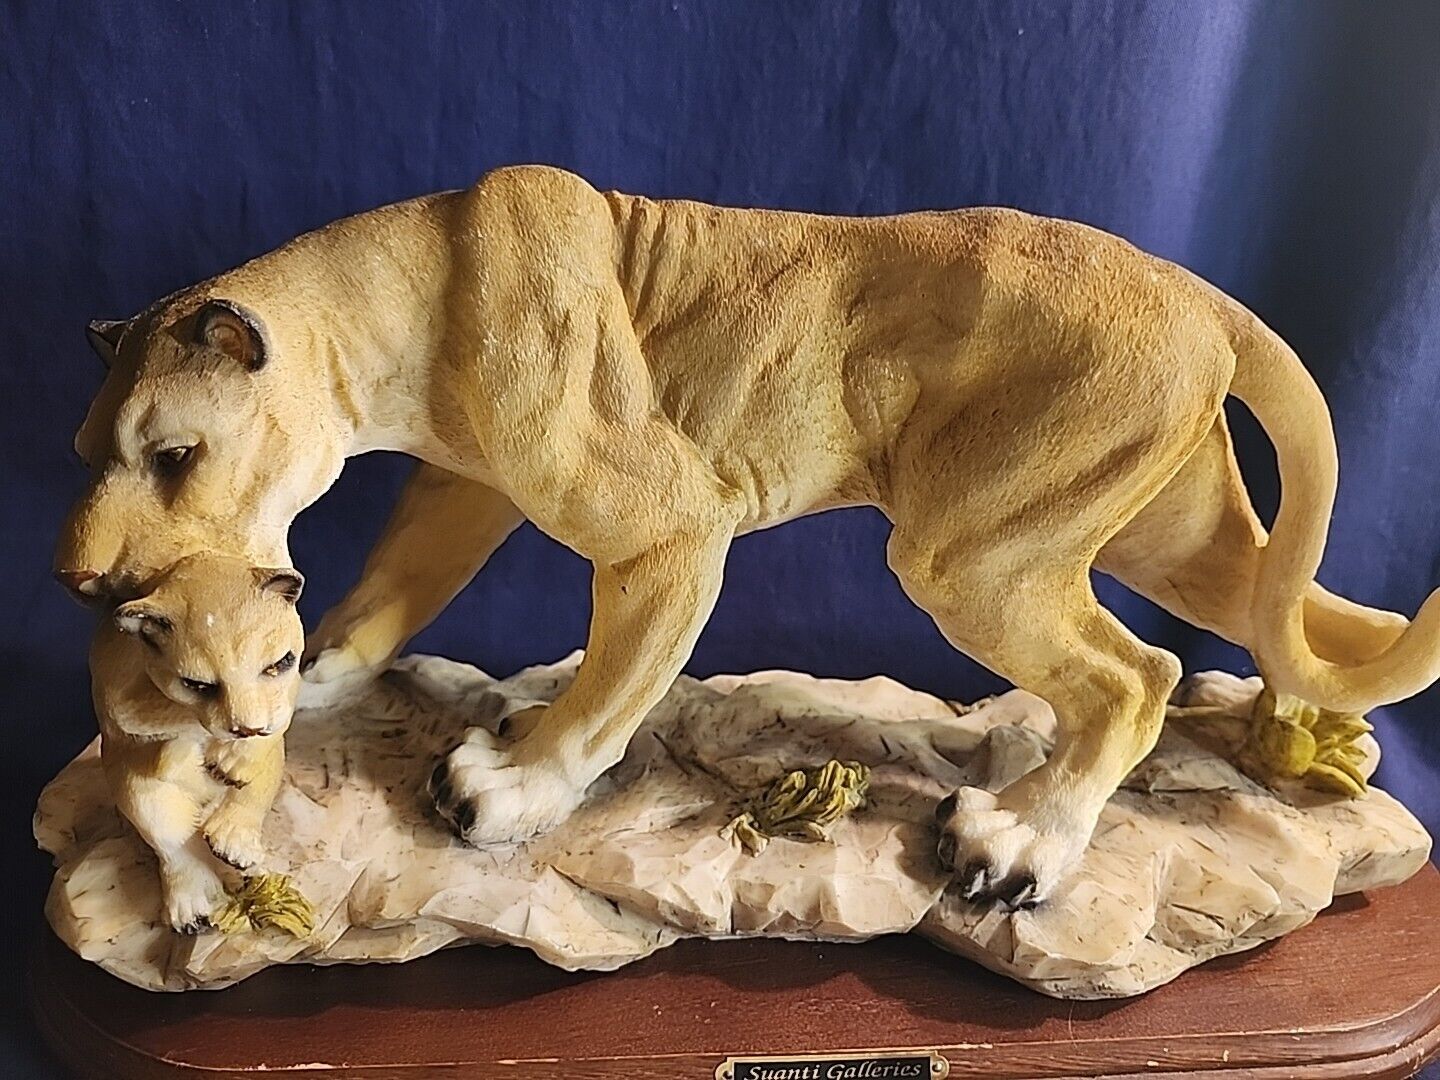 Suanti Galleries Vintage Lioness Carrying Her Cub